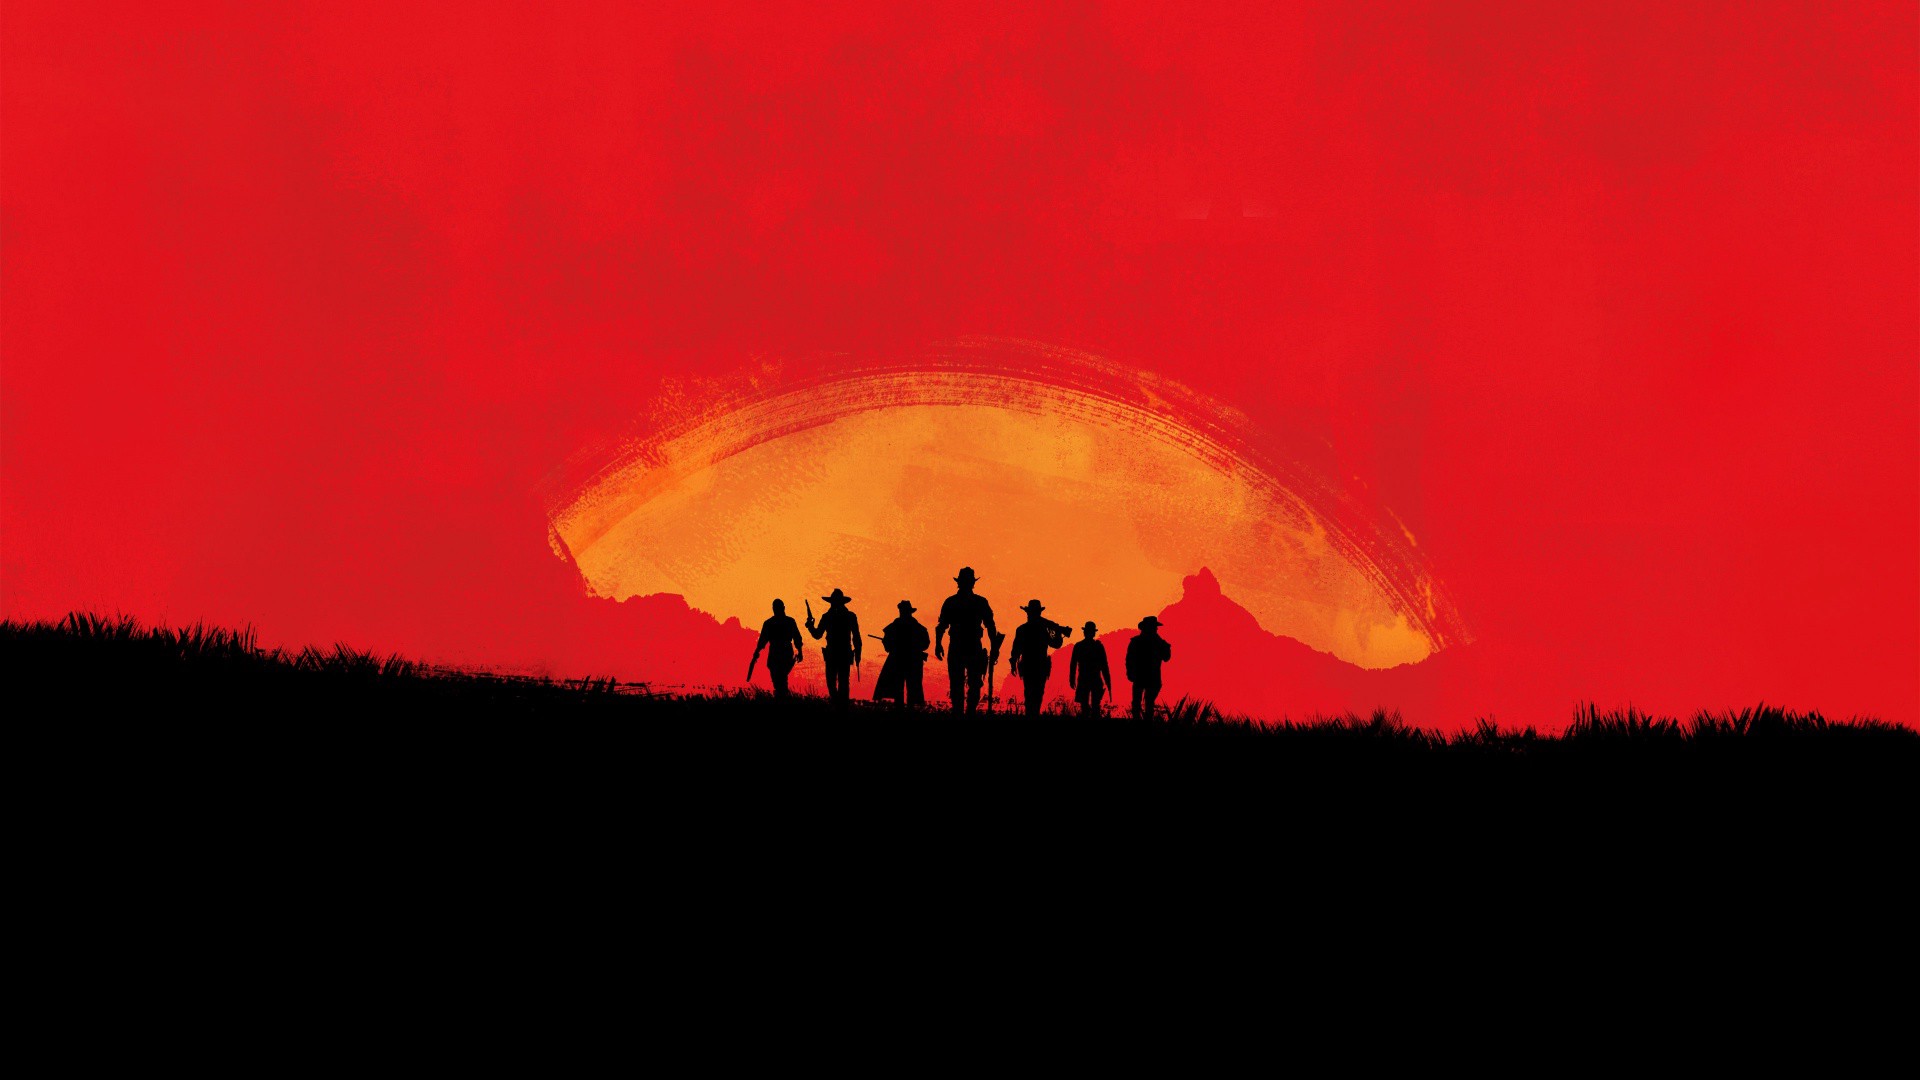 Work in progress iPhone wallpaper for one of the most iconic scenes in the  game Enjoy   rreddeadredemption